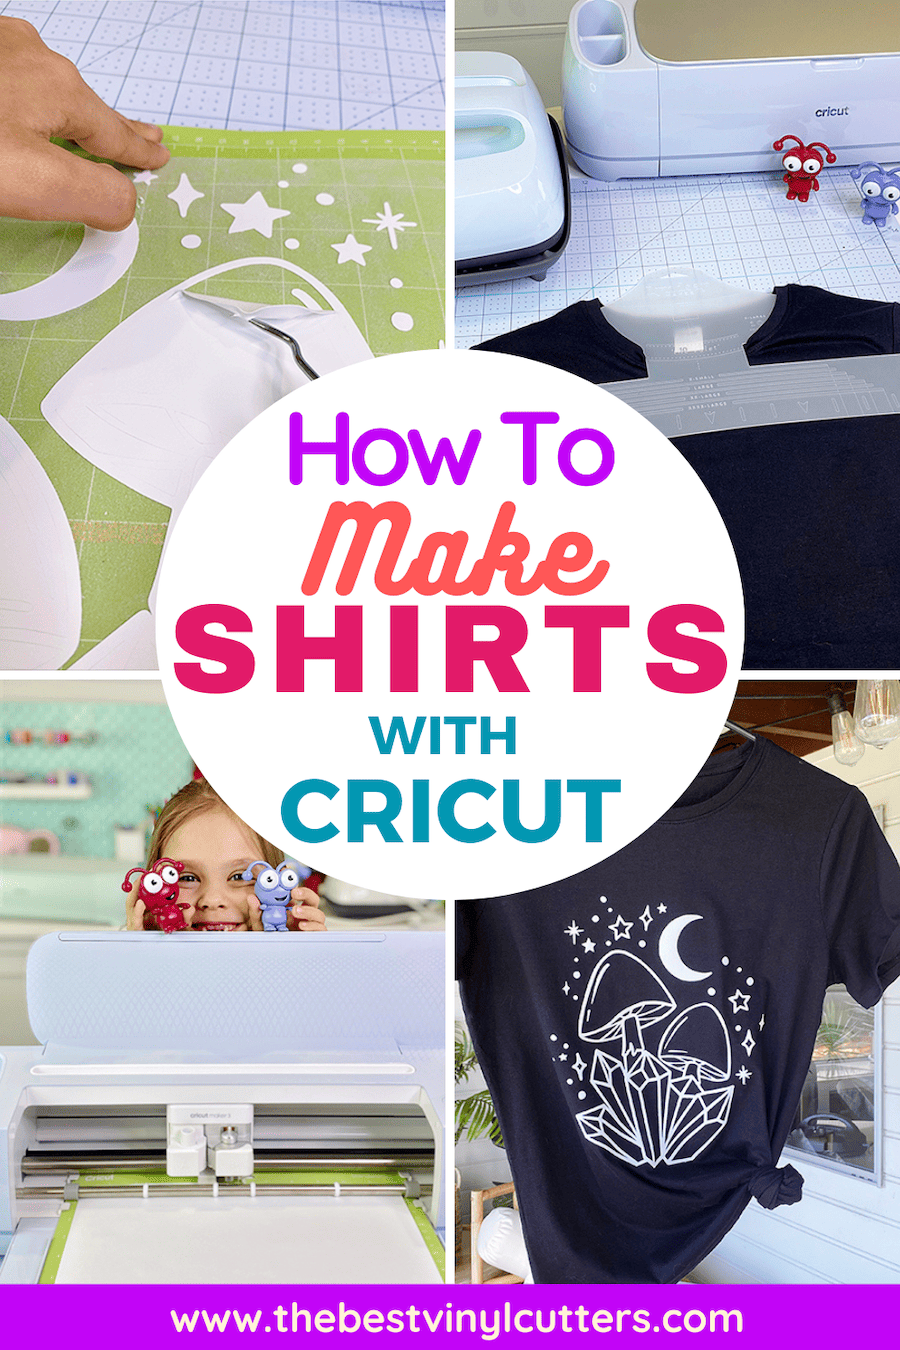 How to make shirts with Cricut